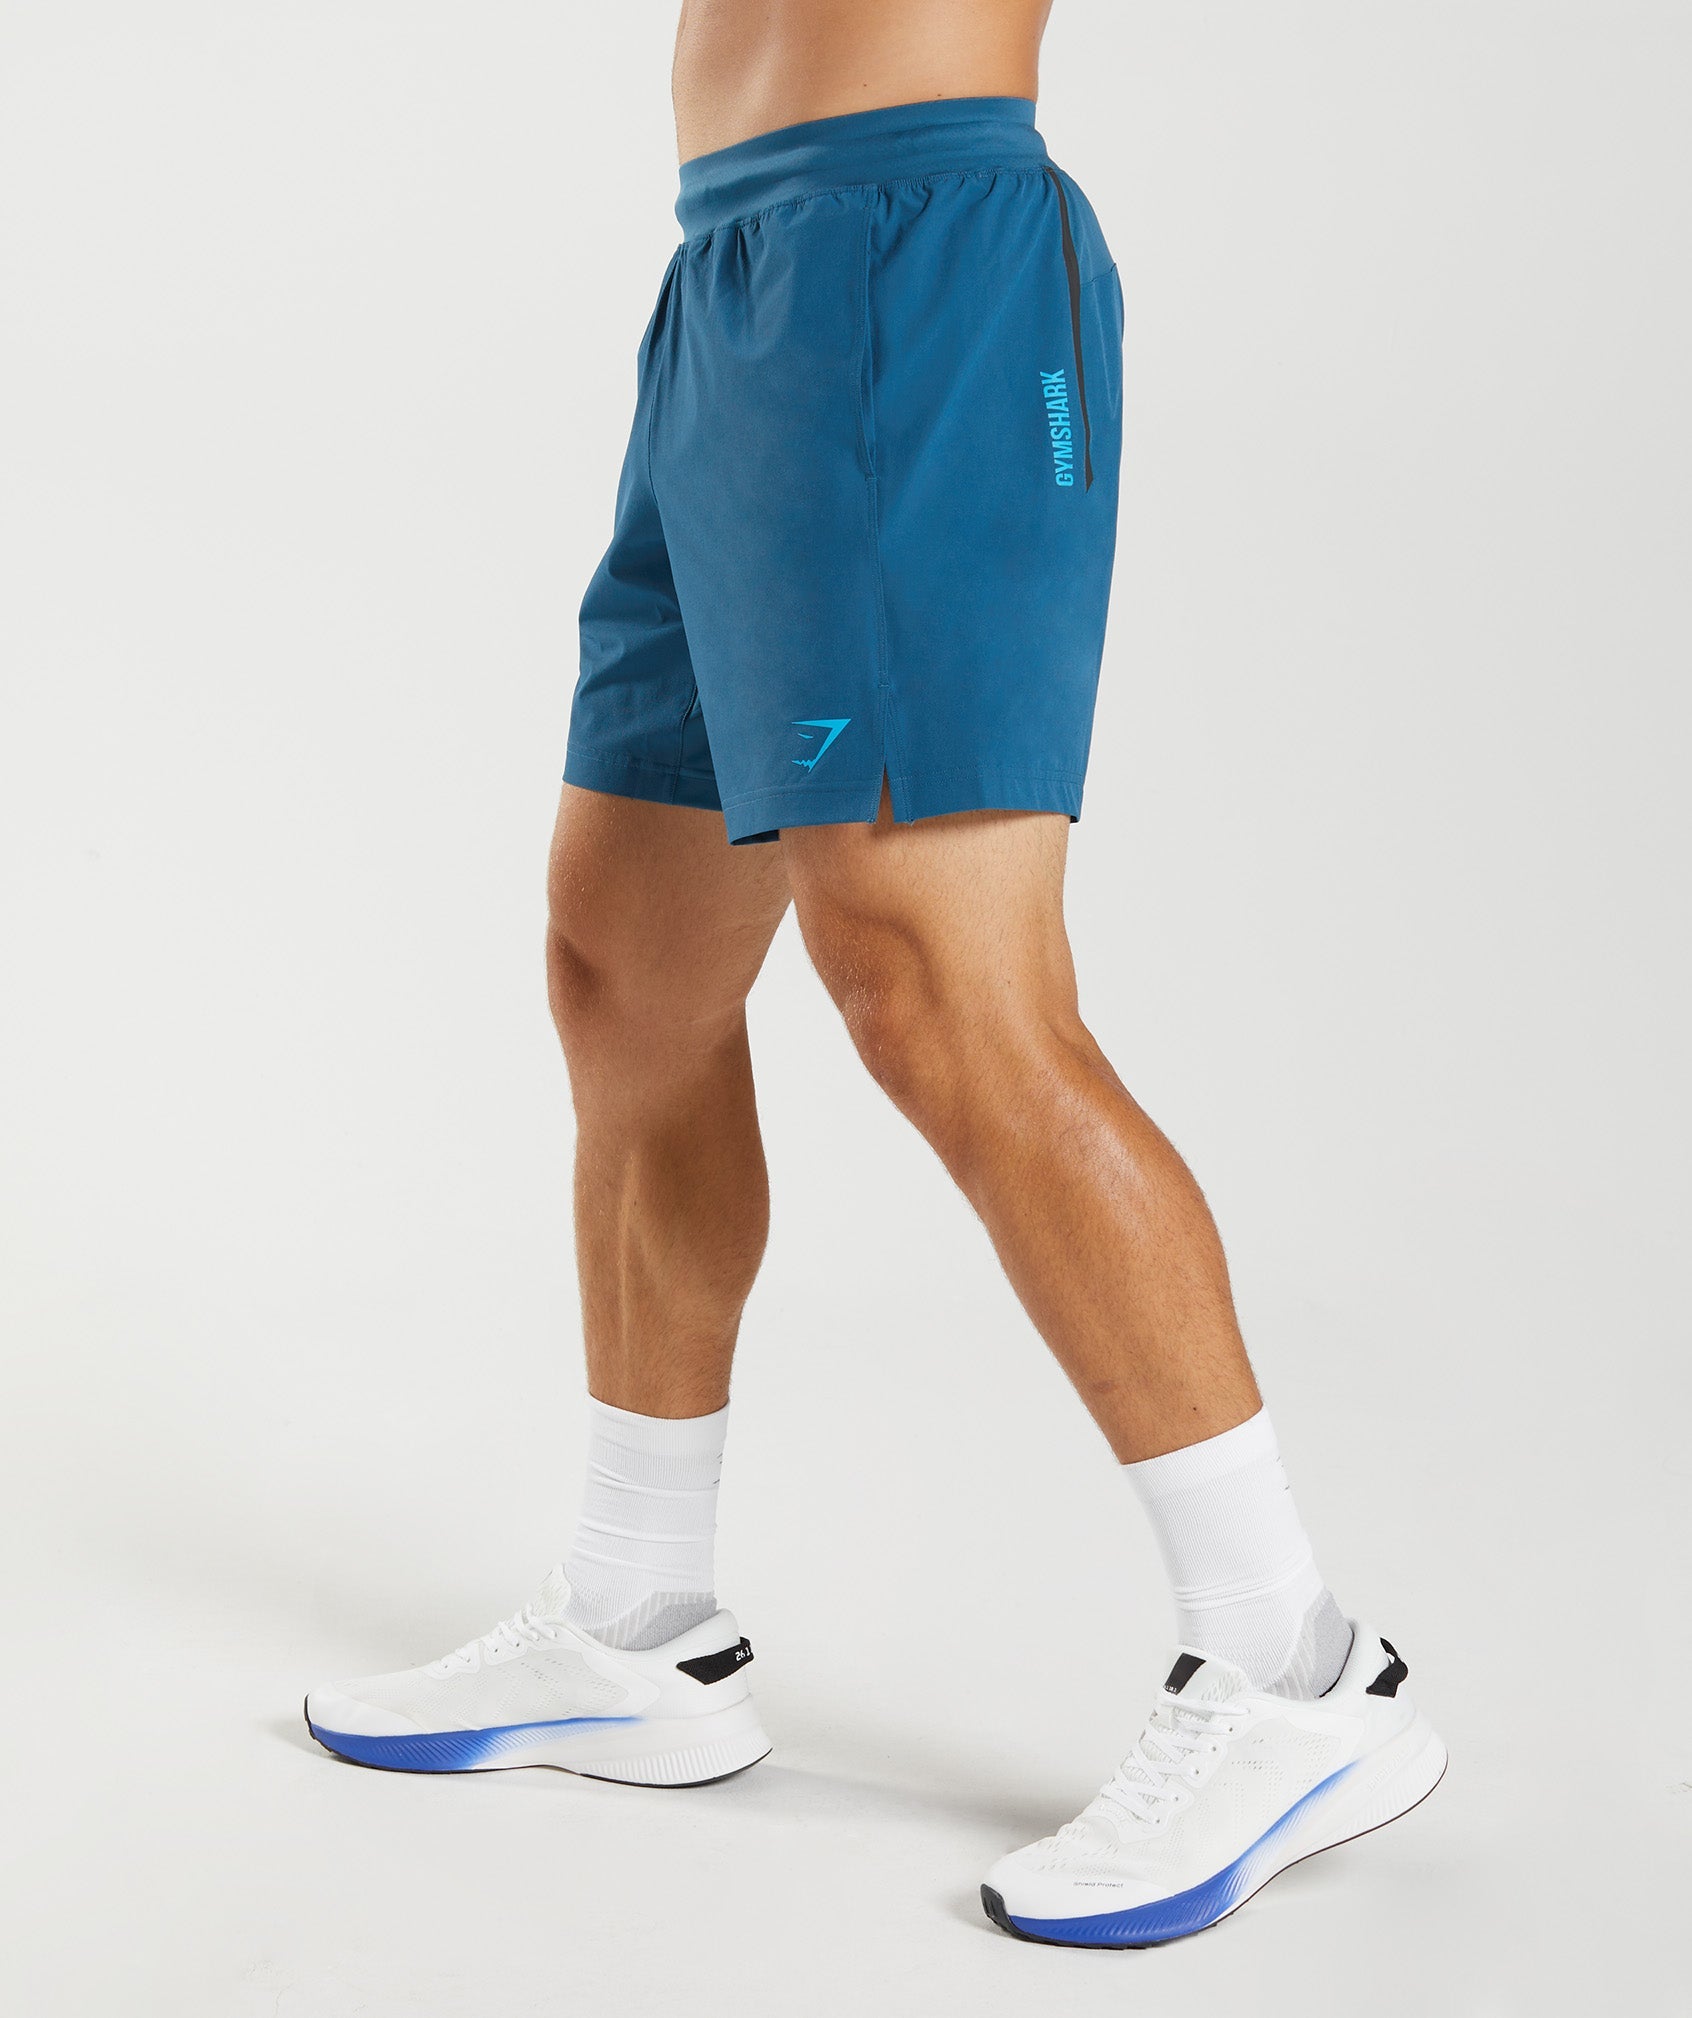 Apex 8" Function Shorts in Atlantic Blue - view 3